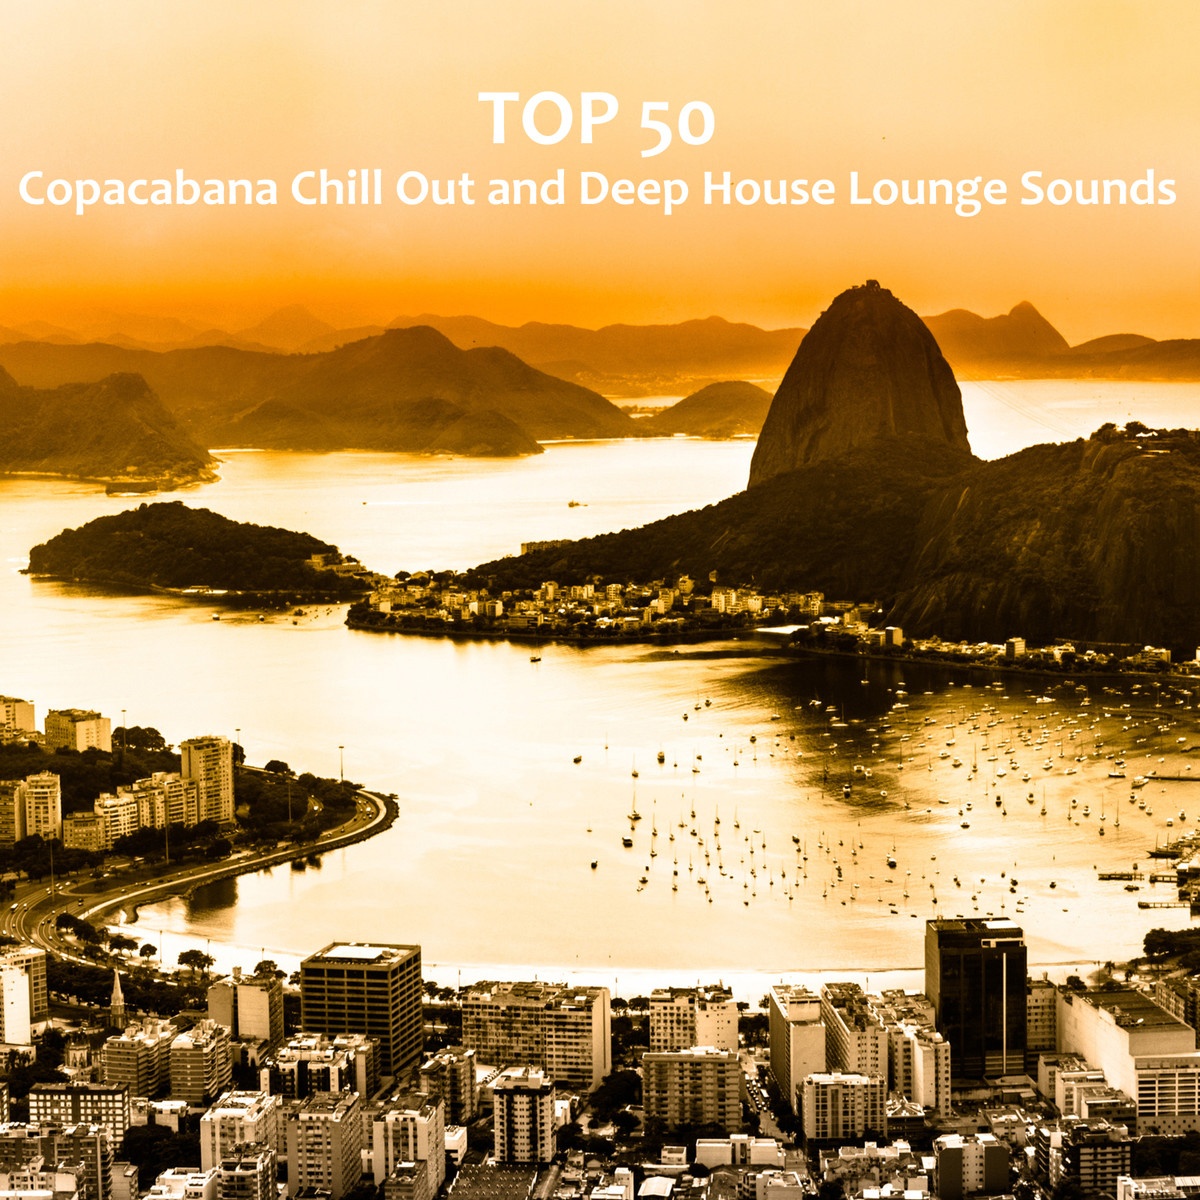 Top 50 Copacabana Chill Out and Deep House Lounge Sounds